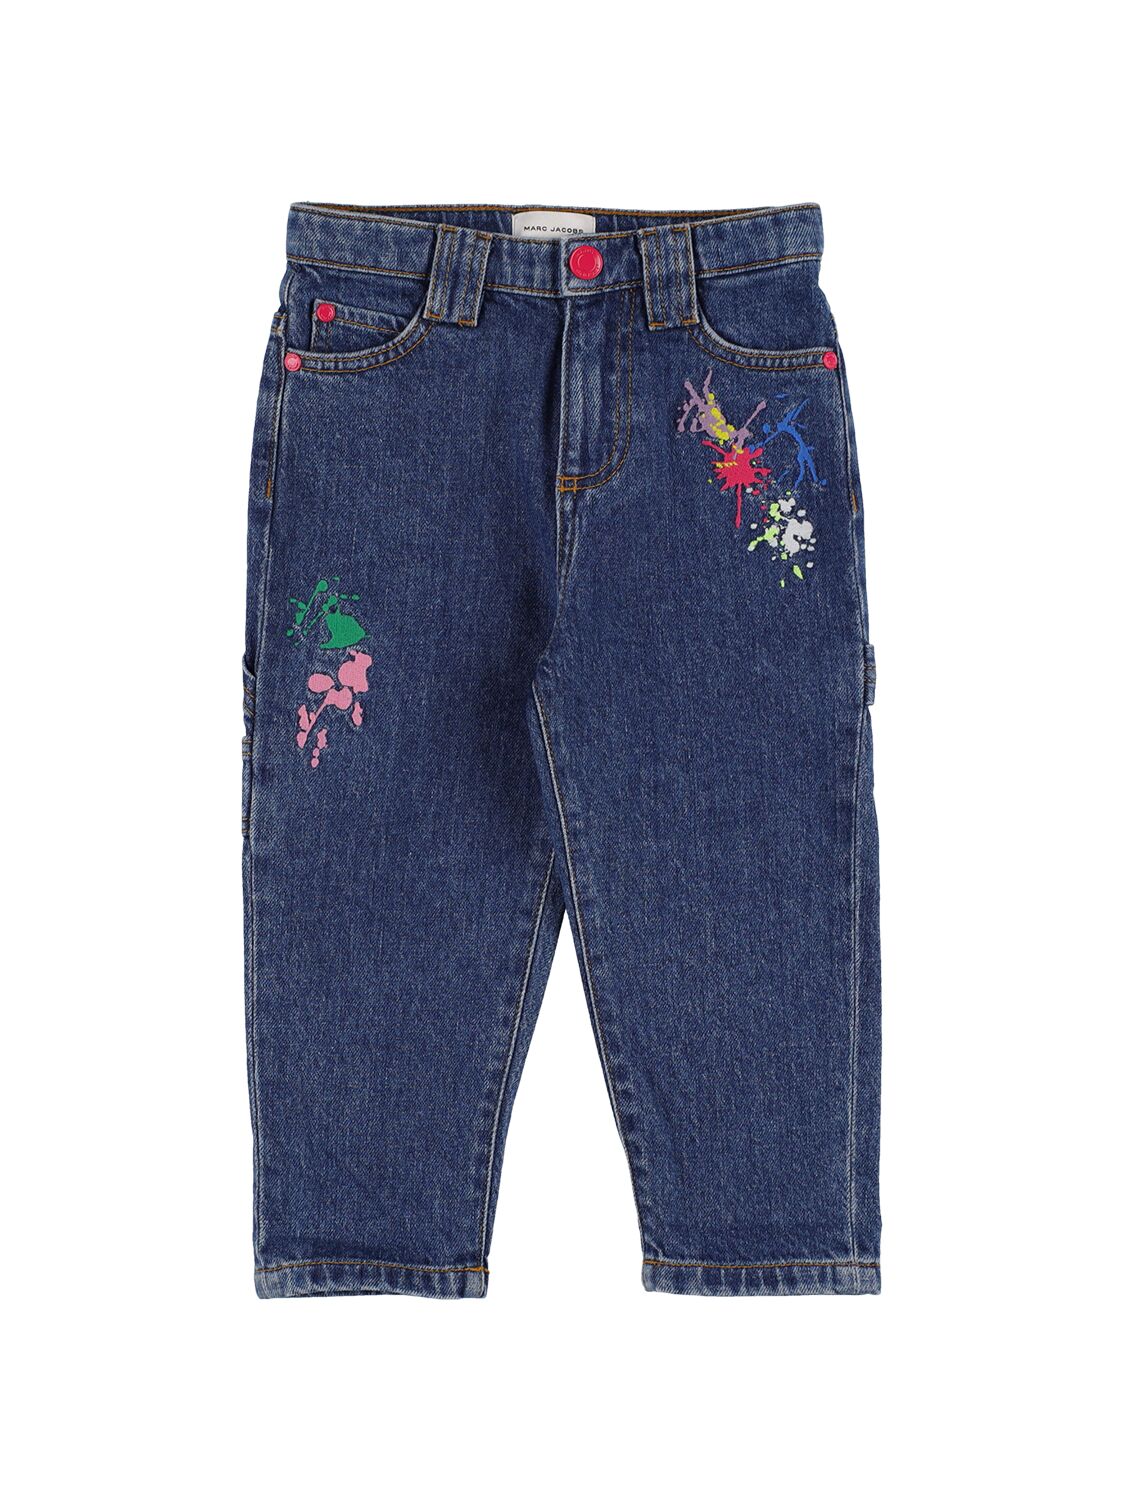 Image of Denim Cotton Jeans W/embroidered Details